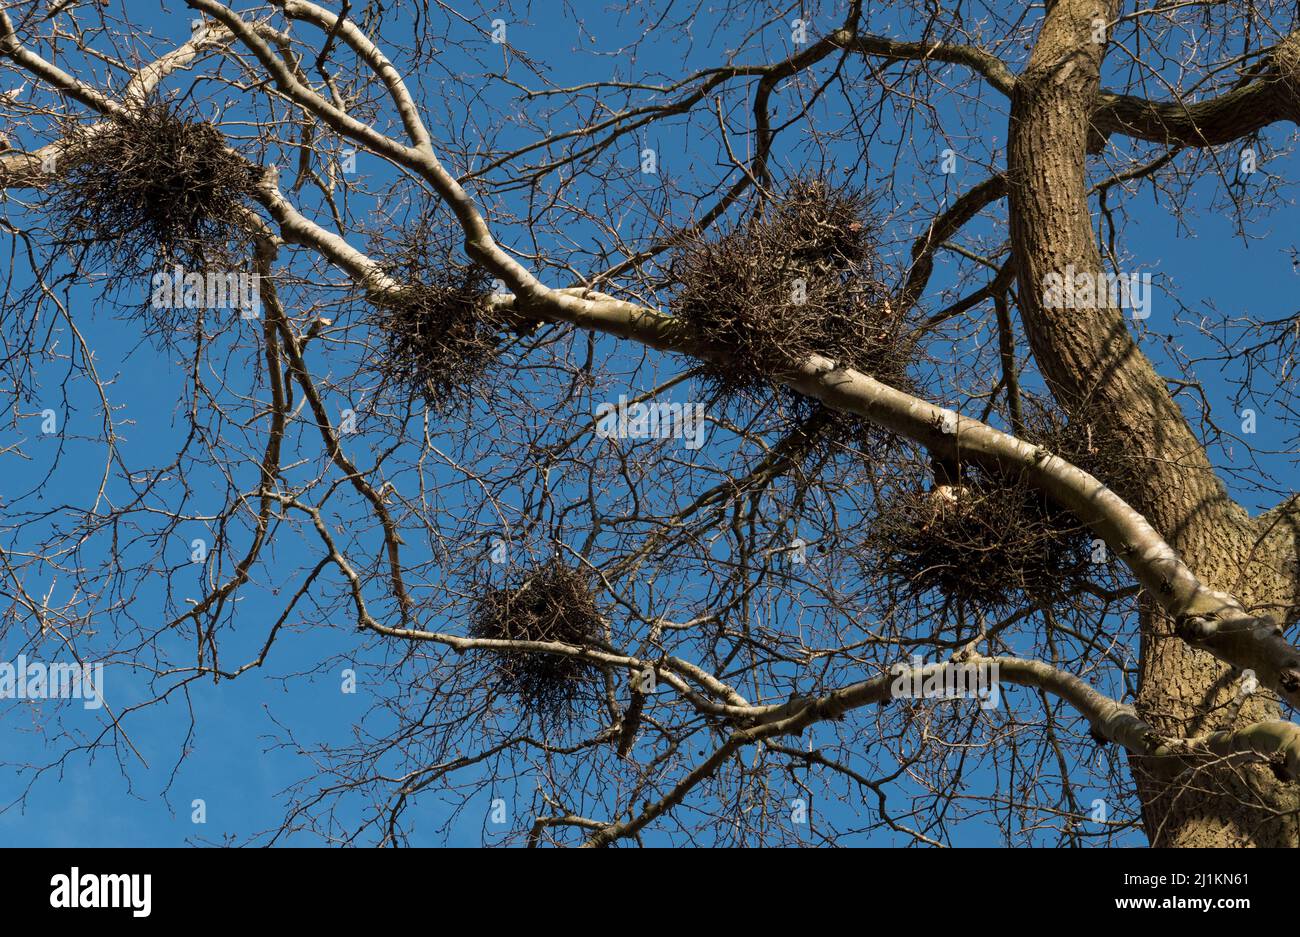 Witches broom, dense bunches of stunted twigs, in a Birch against blue sky Stock Photo